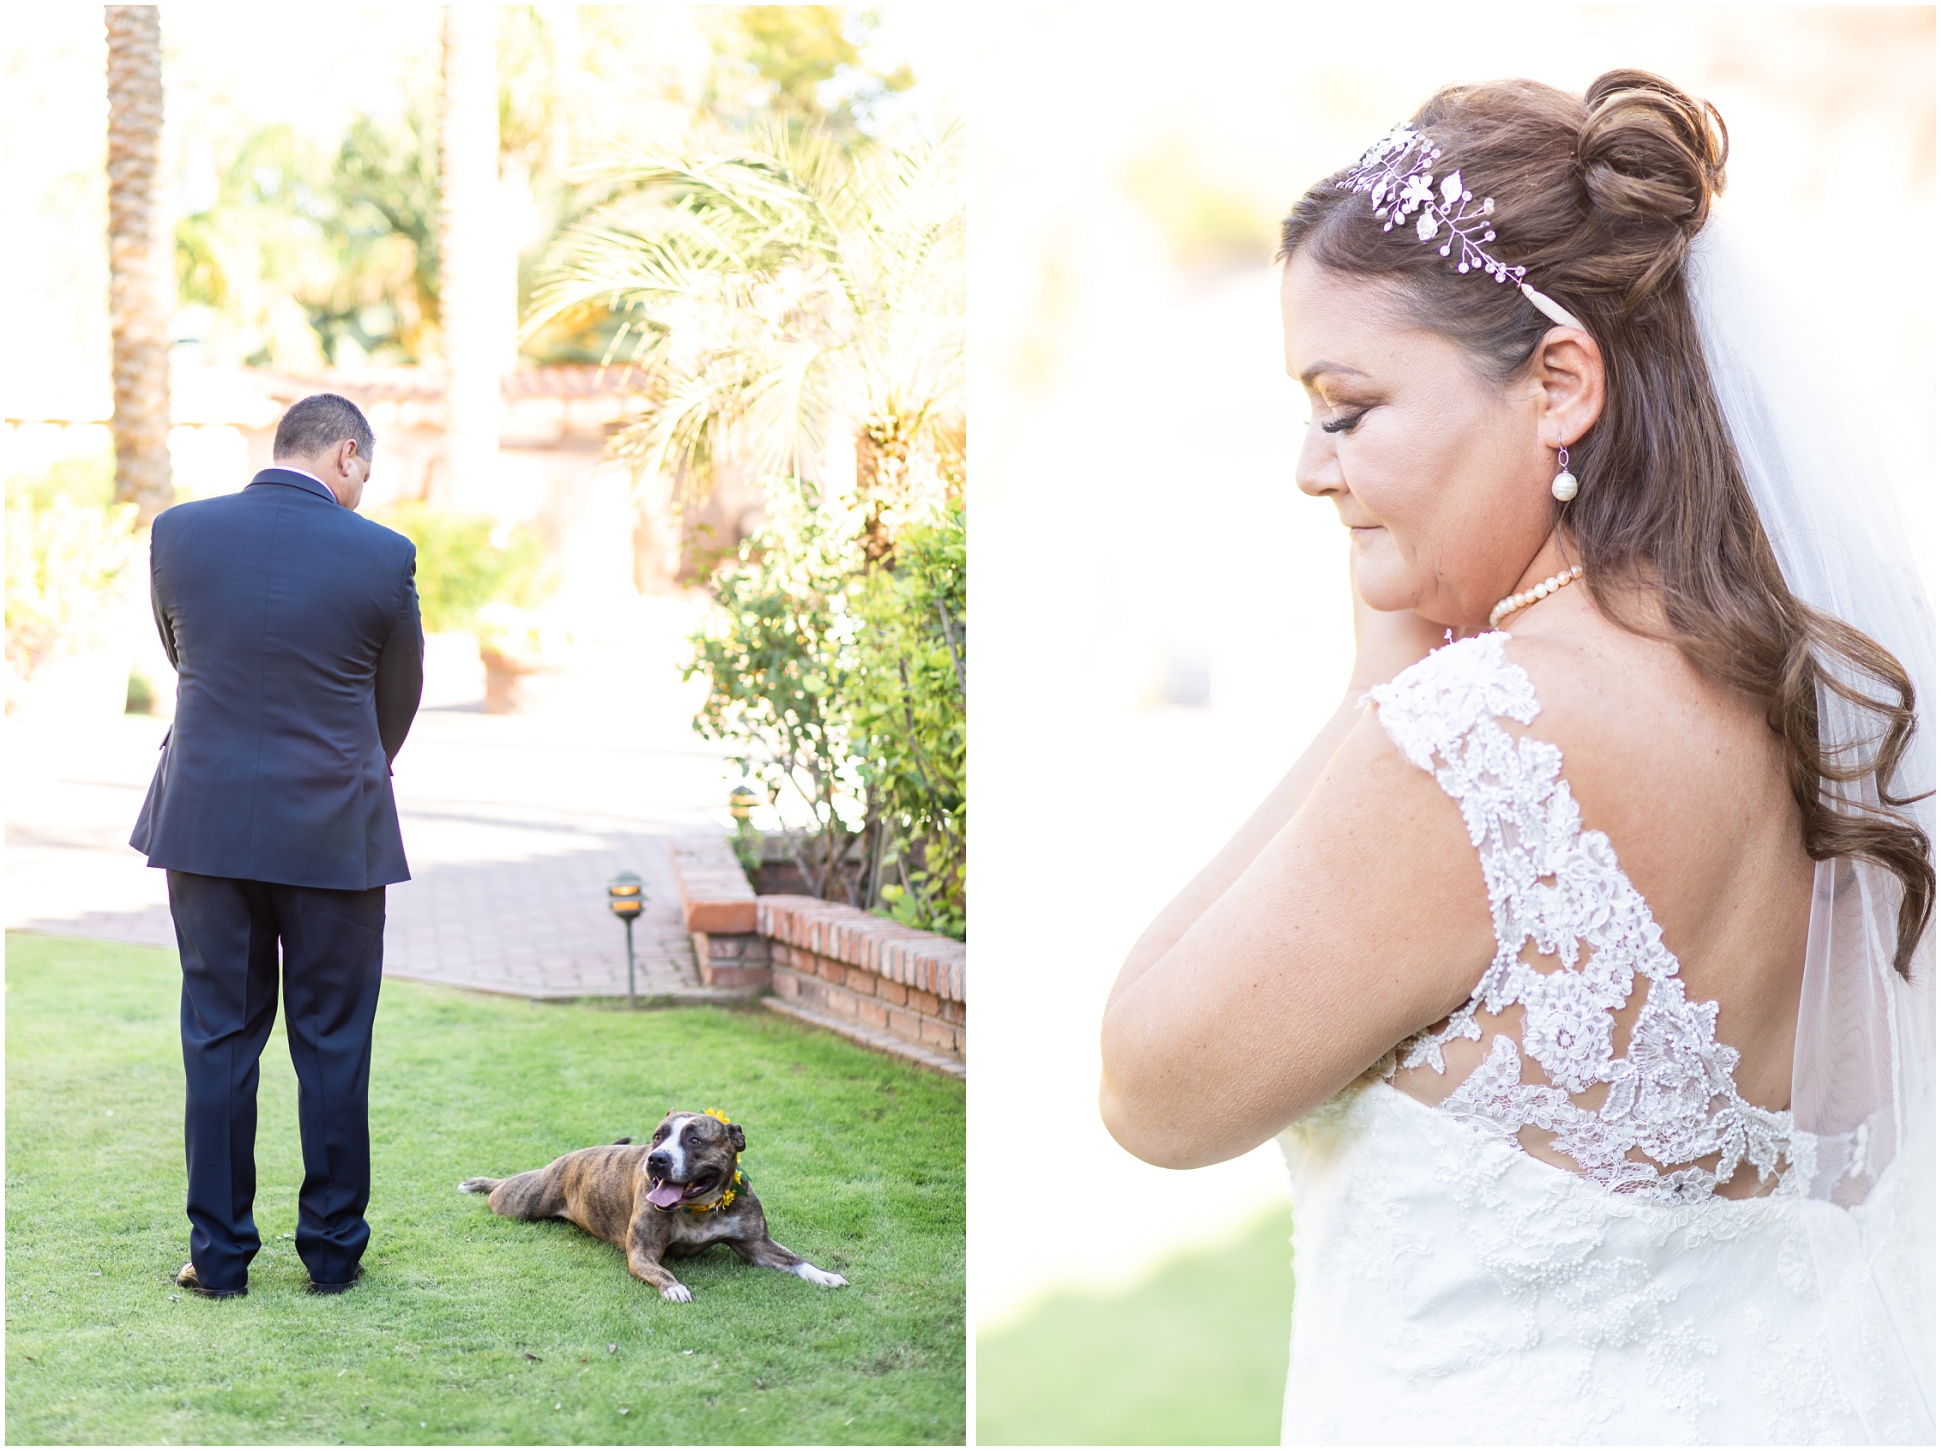 Left Image: Groom waiting for bride with his dog, Right Image: Bride putting on earrings